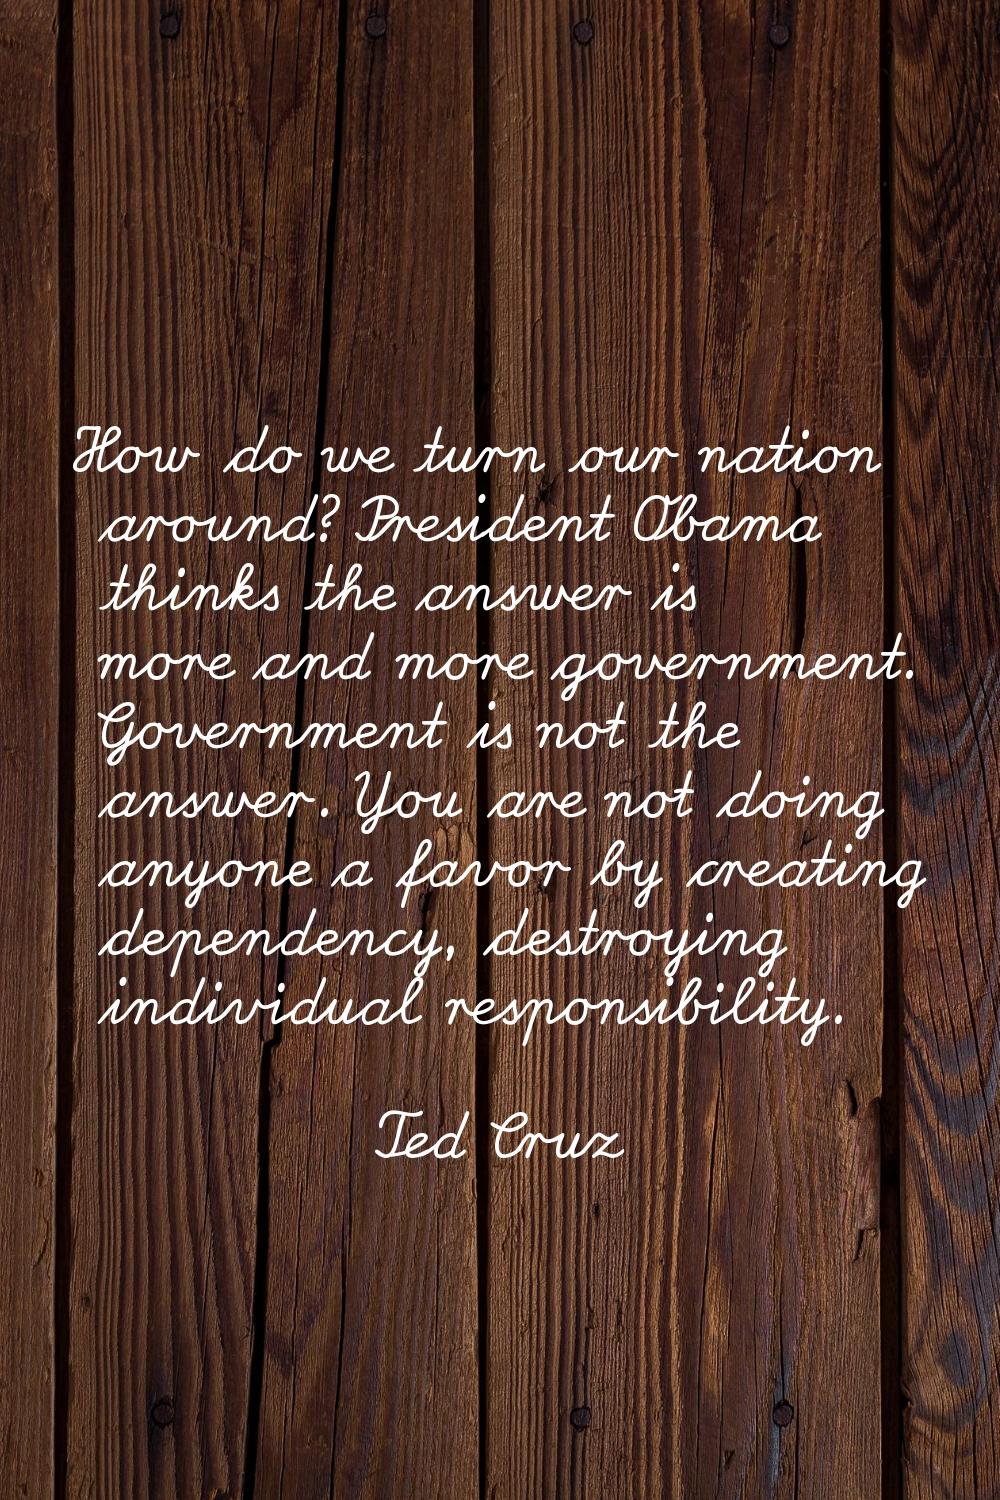 How do we turn our nation around? President Obama thinks the answer is more and more government. Go